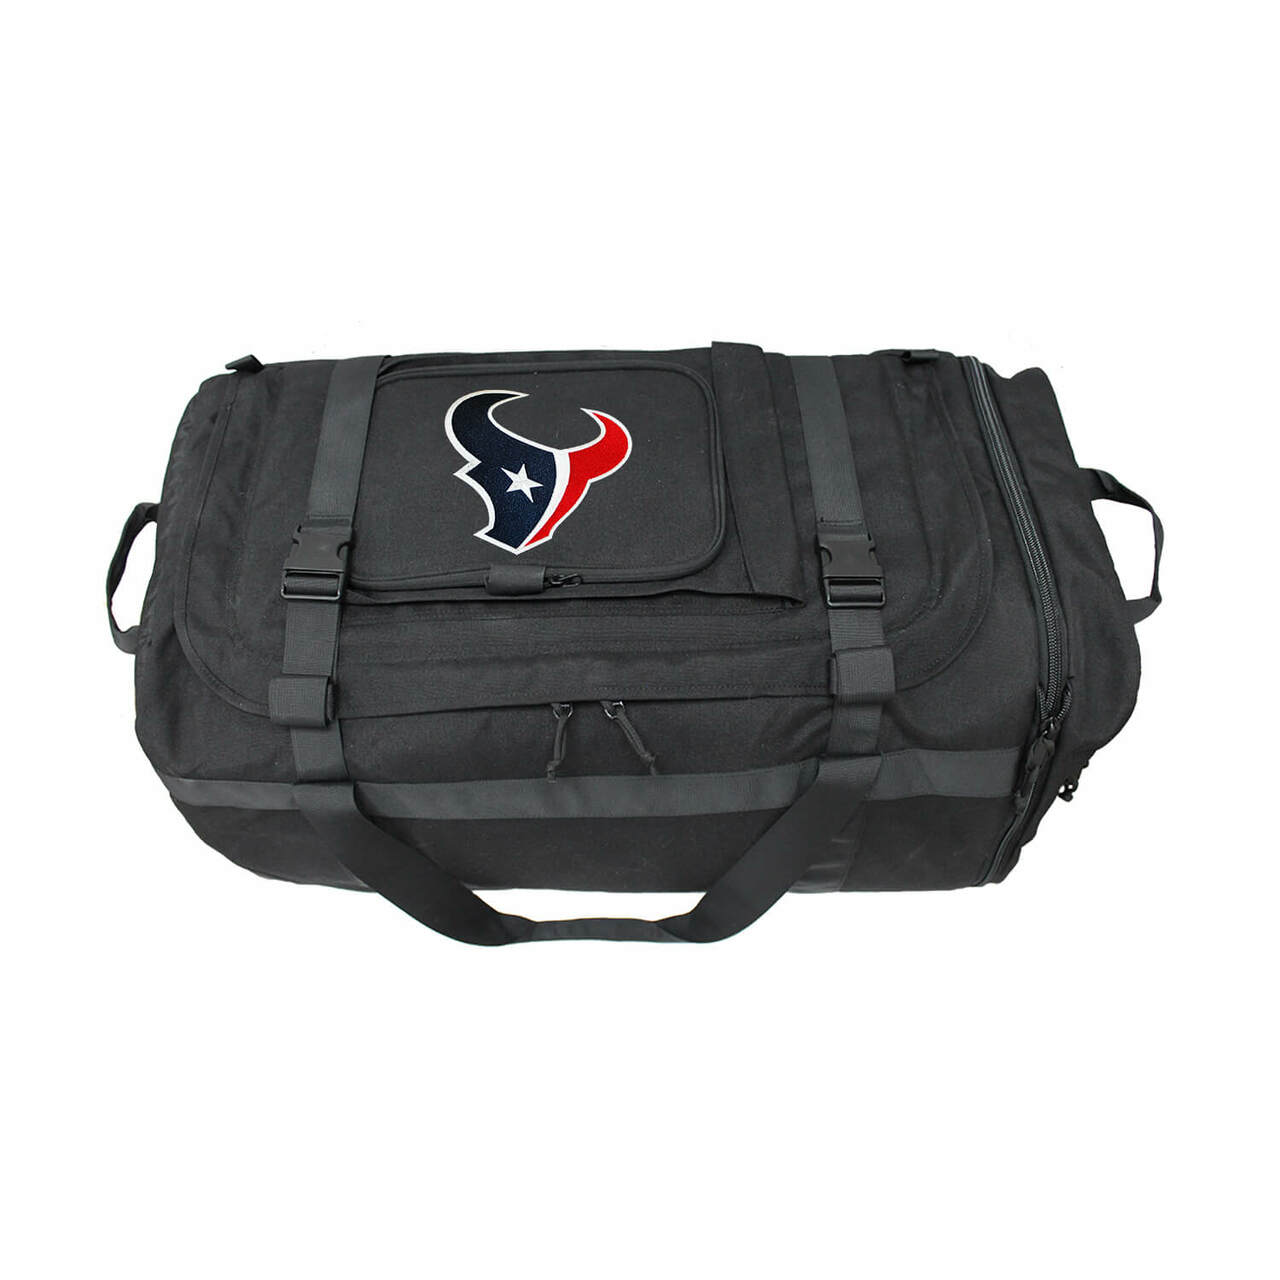 Houston Texans Made in the USA Military Duffel